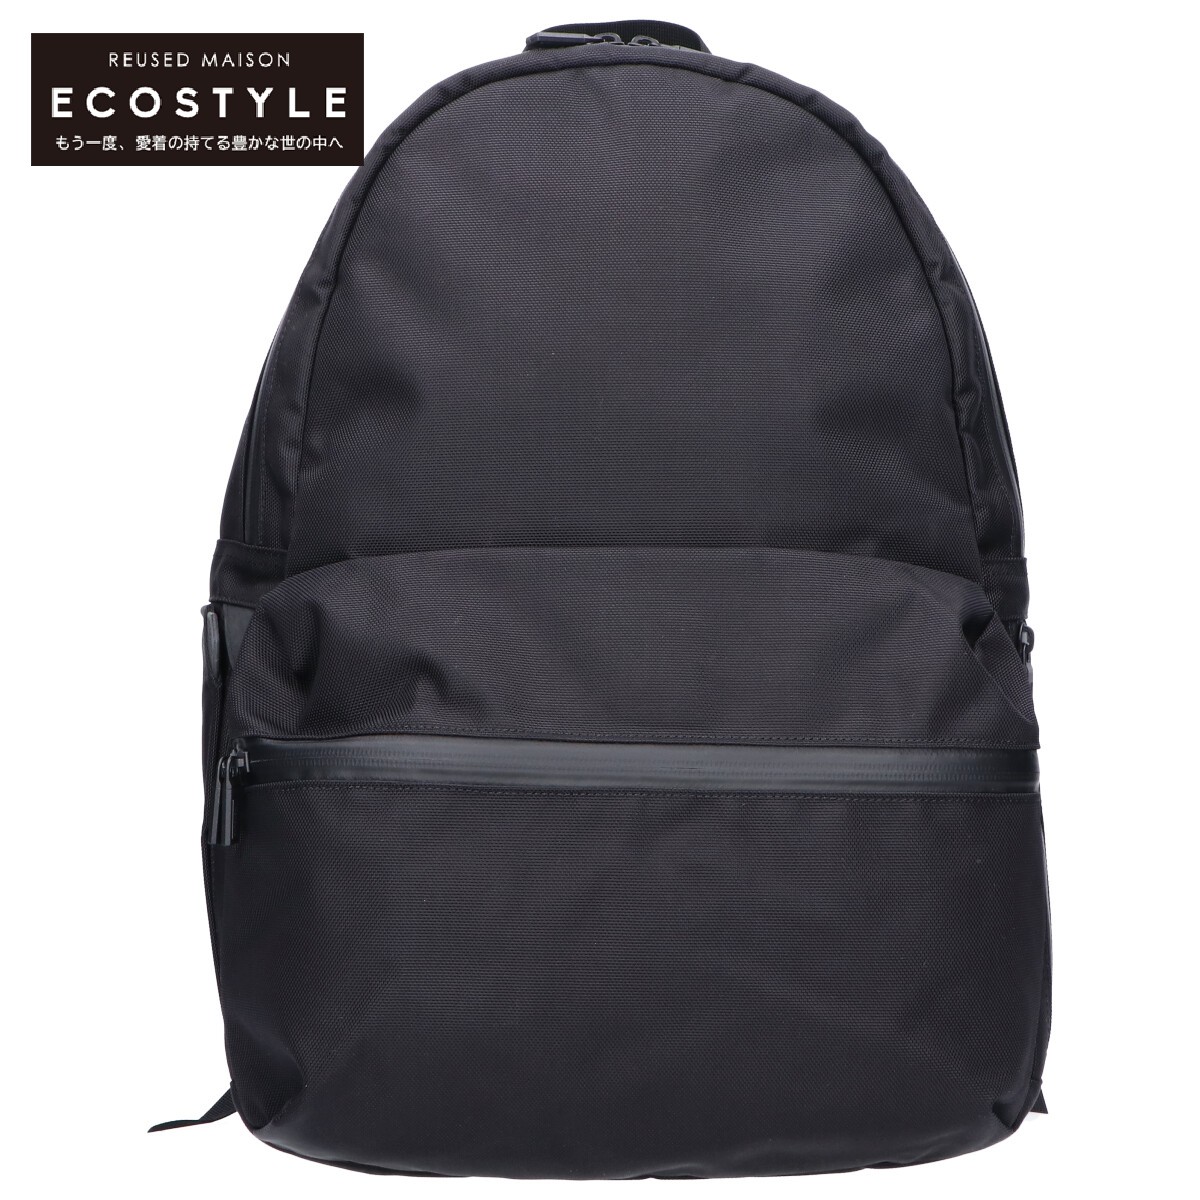 MONOLITH BACKPACK OFFICE S モノリスバックパック - リュック/バック